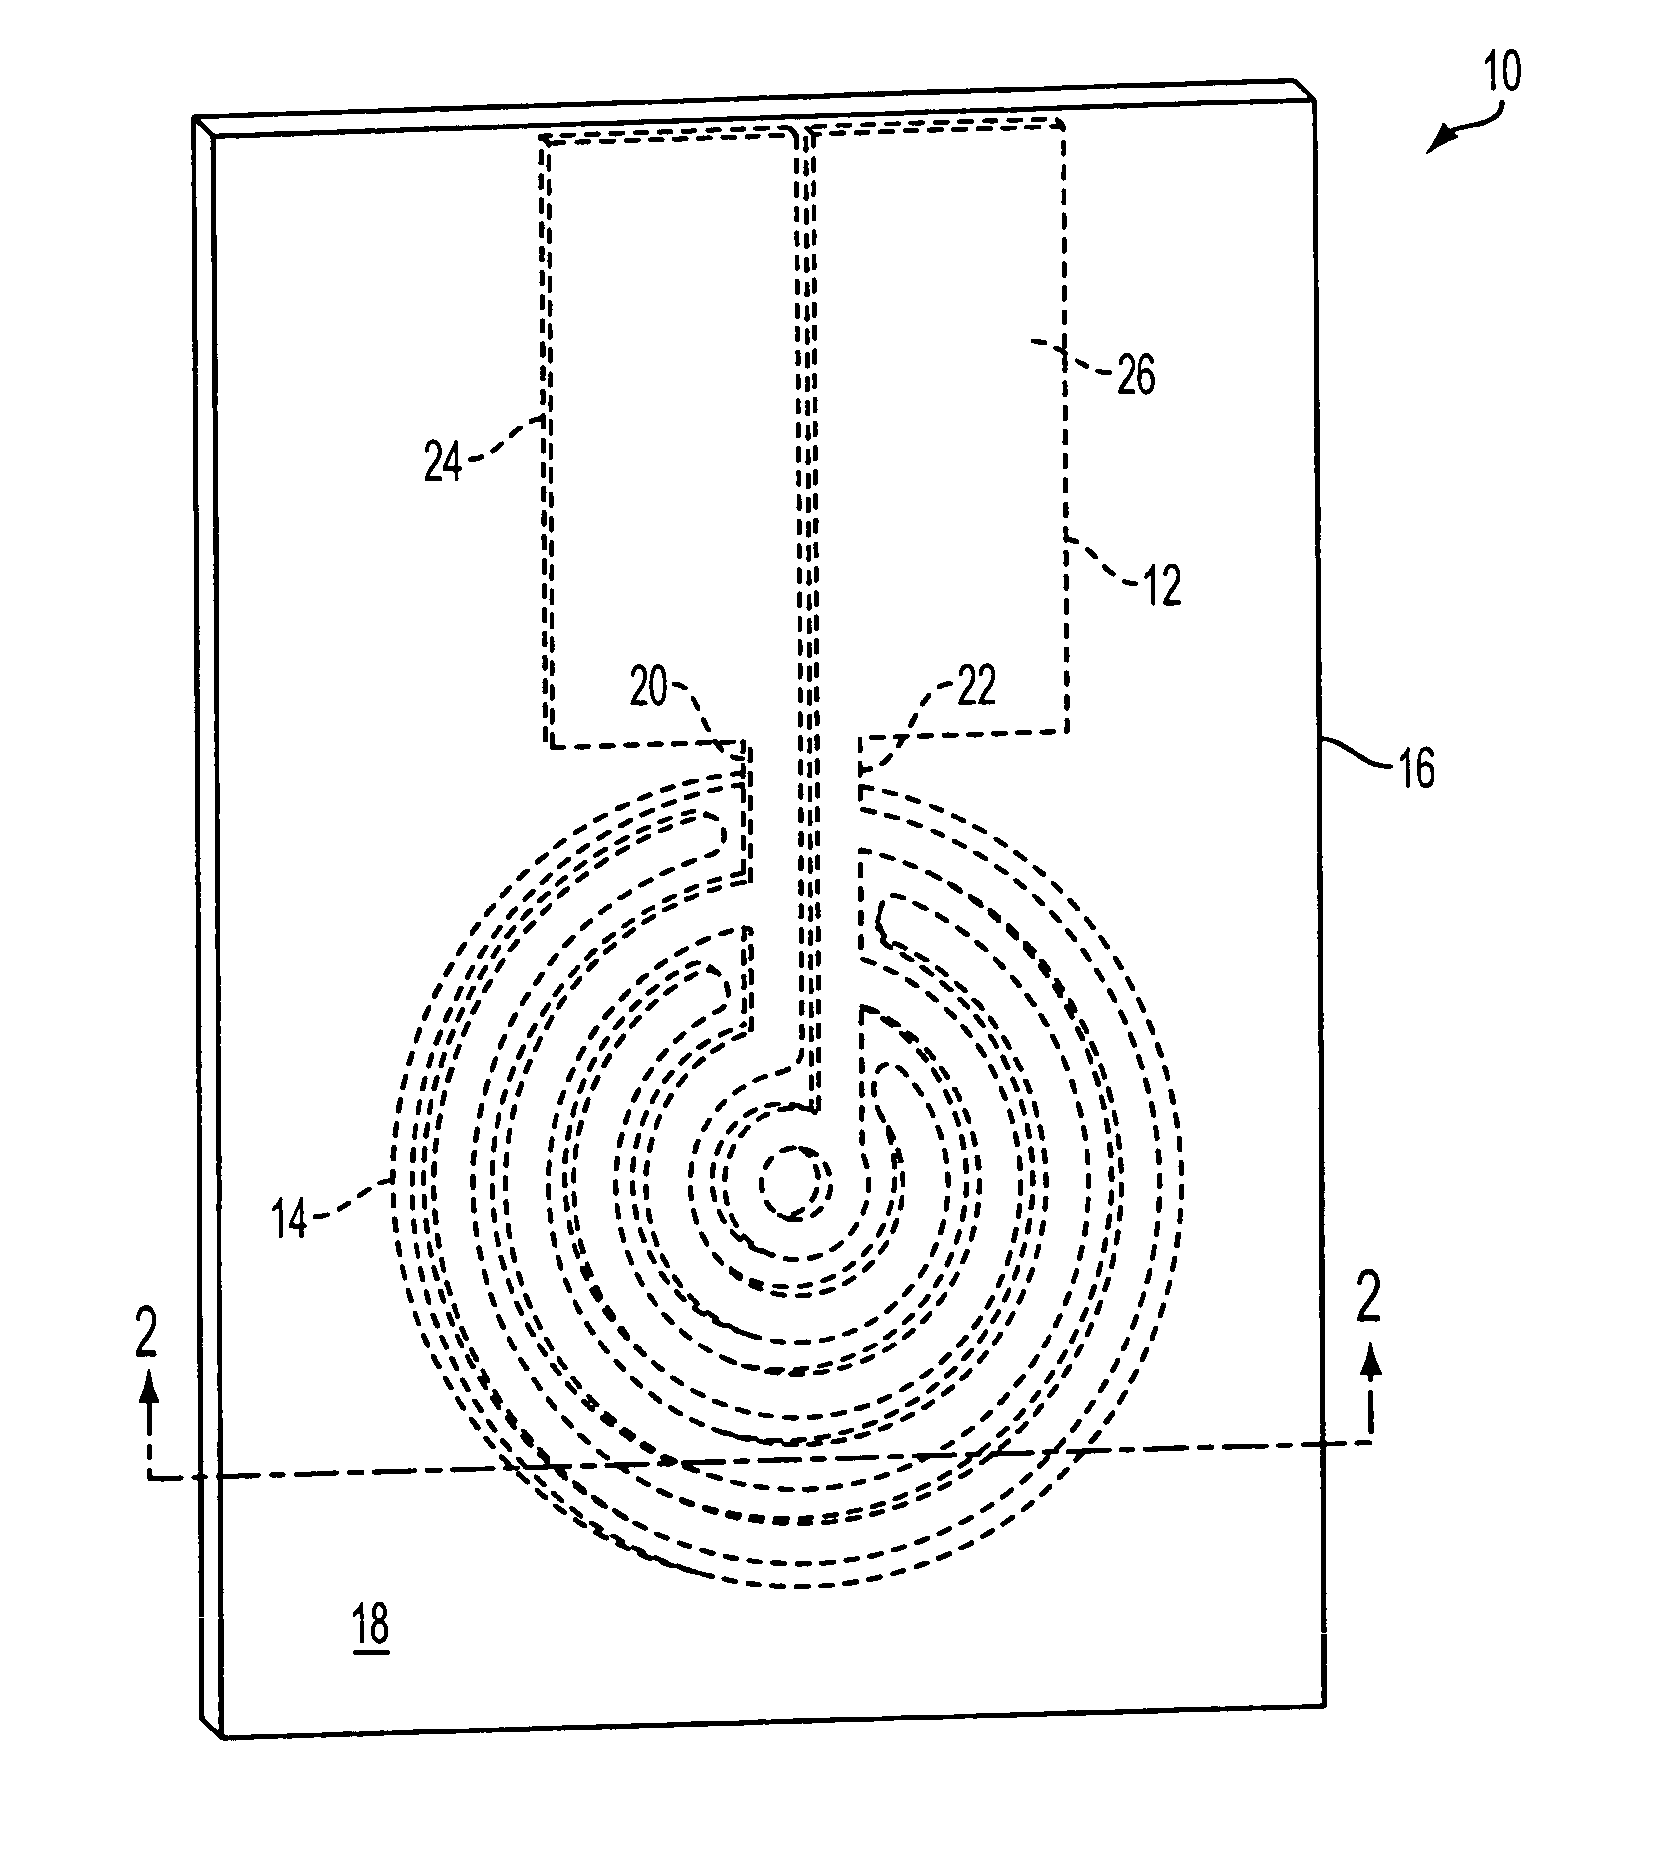 Apparatus and method for heating microfluidic volumes and moving fluids